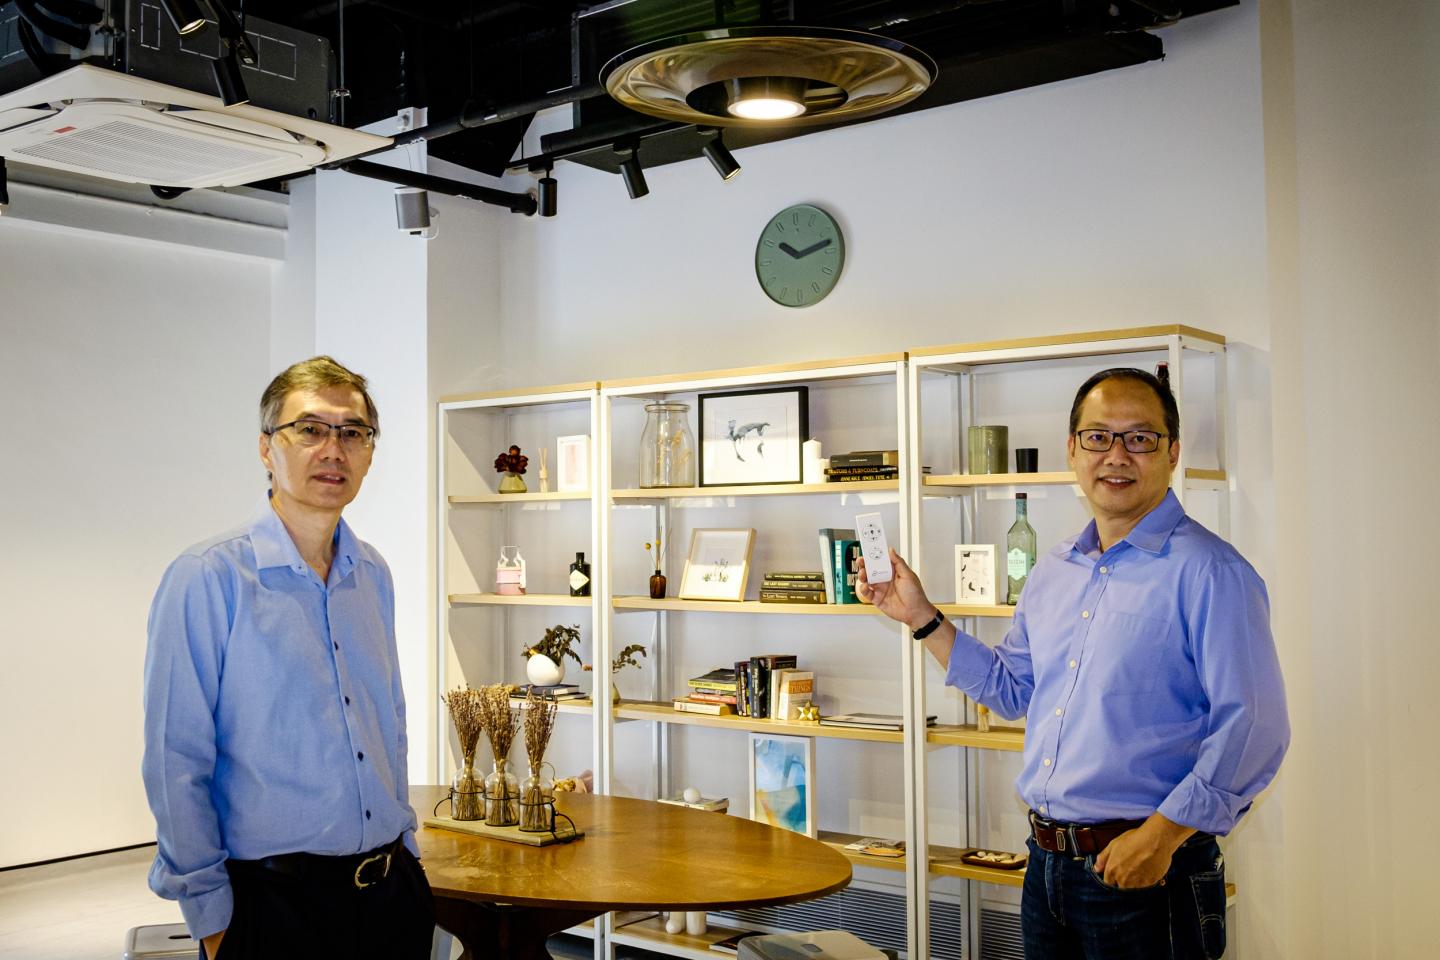 A Vortec fan installed at Cafe71, on the NTUsg Smart Campus.